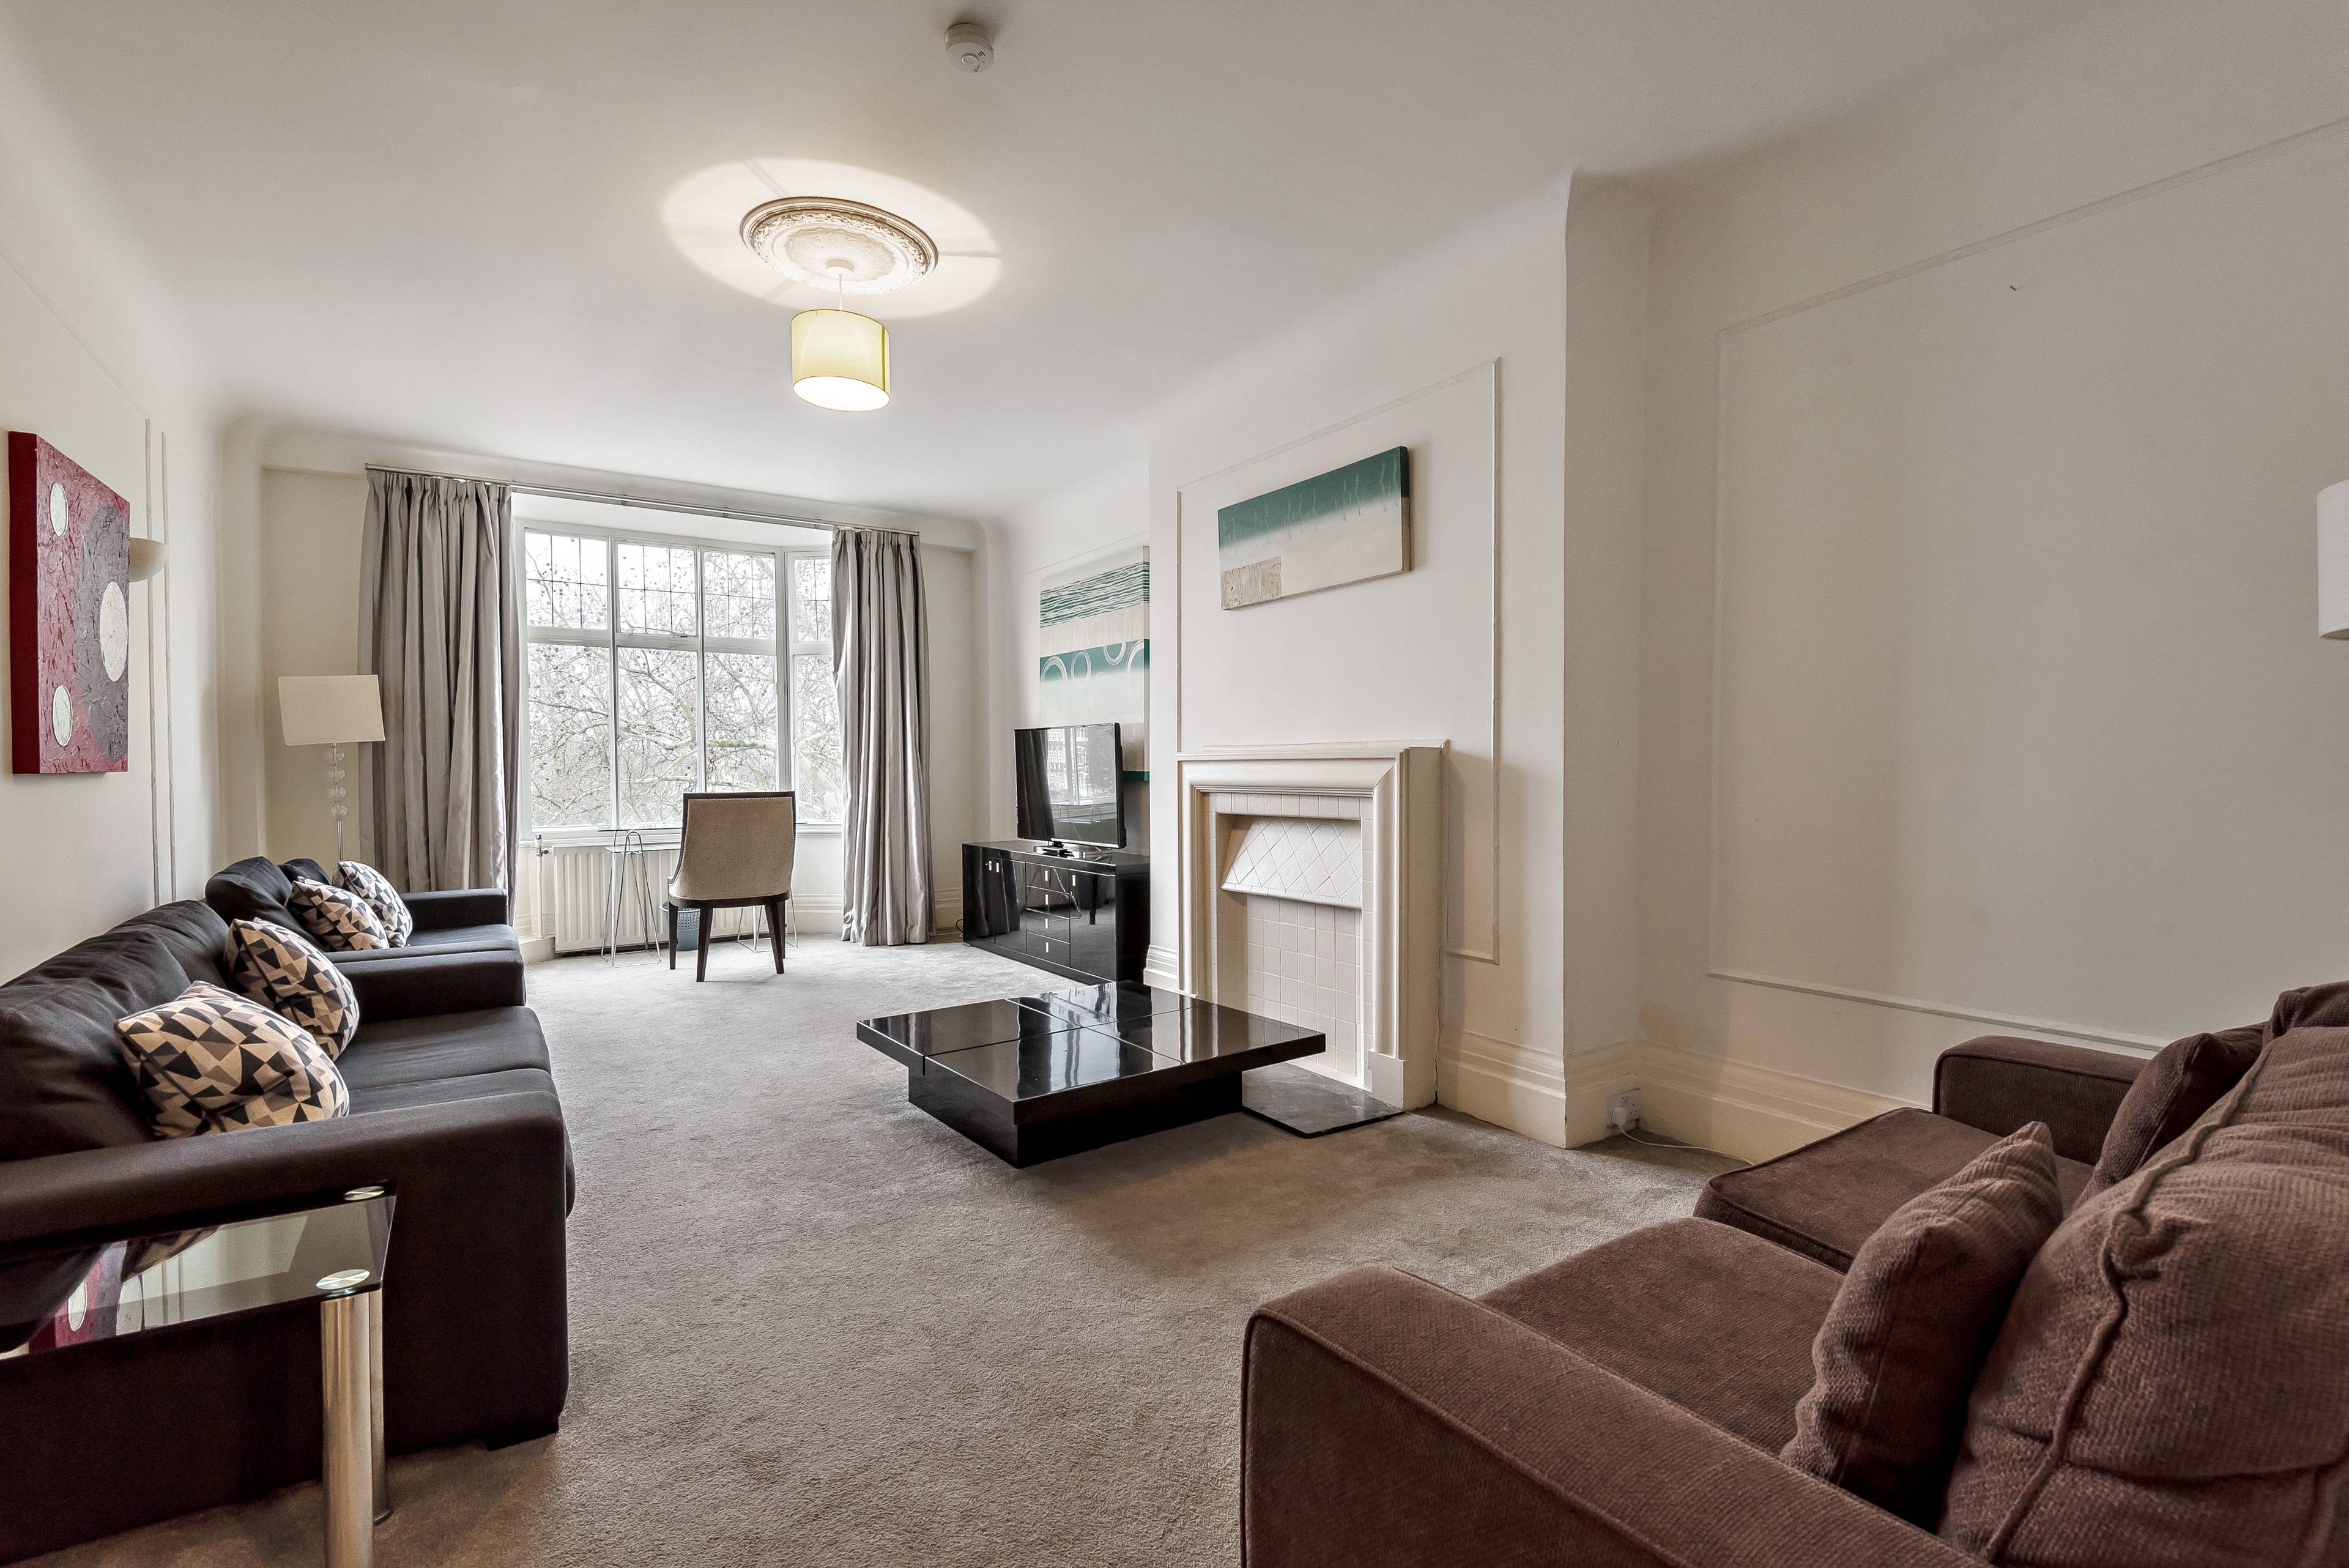 Spacious 5 bedroom apartment in St Johns Wood, Strathmore Court